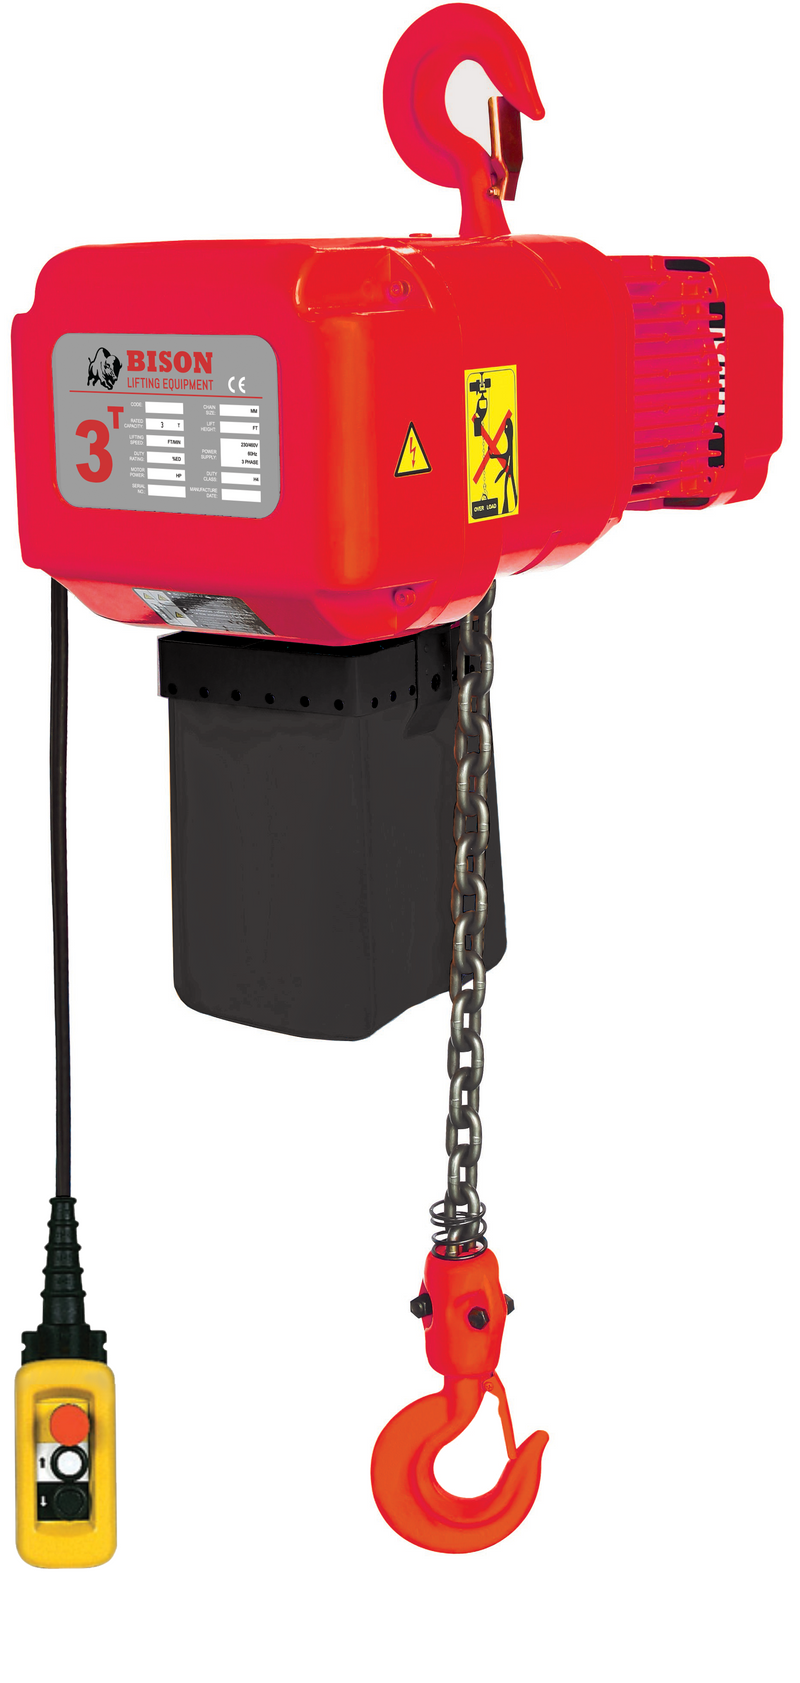 3 ton Electric Chain Hoist - Bison Lifting - Dual Speed, Three Phase, 20' Lift